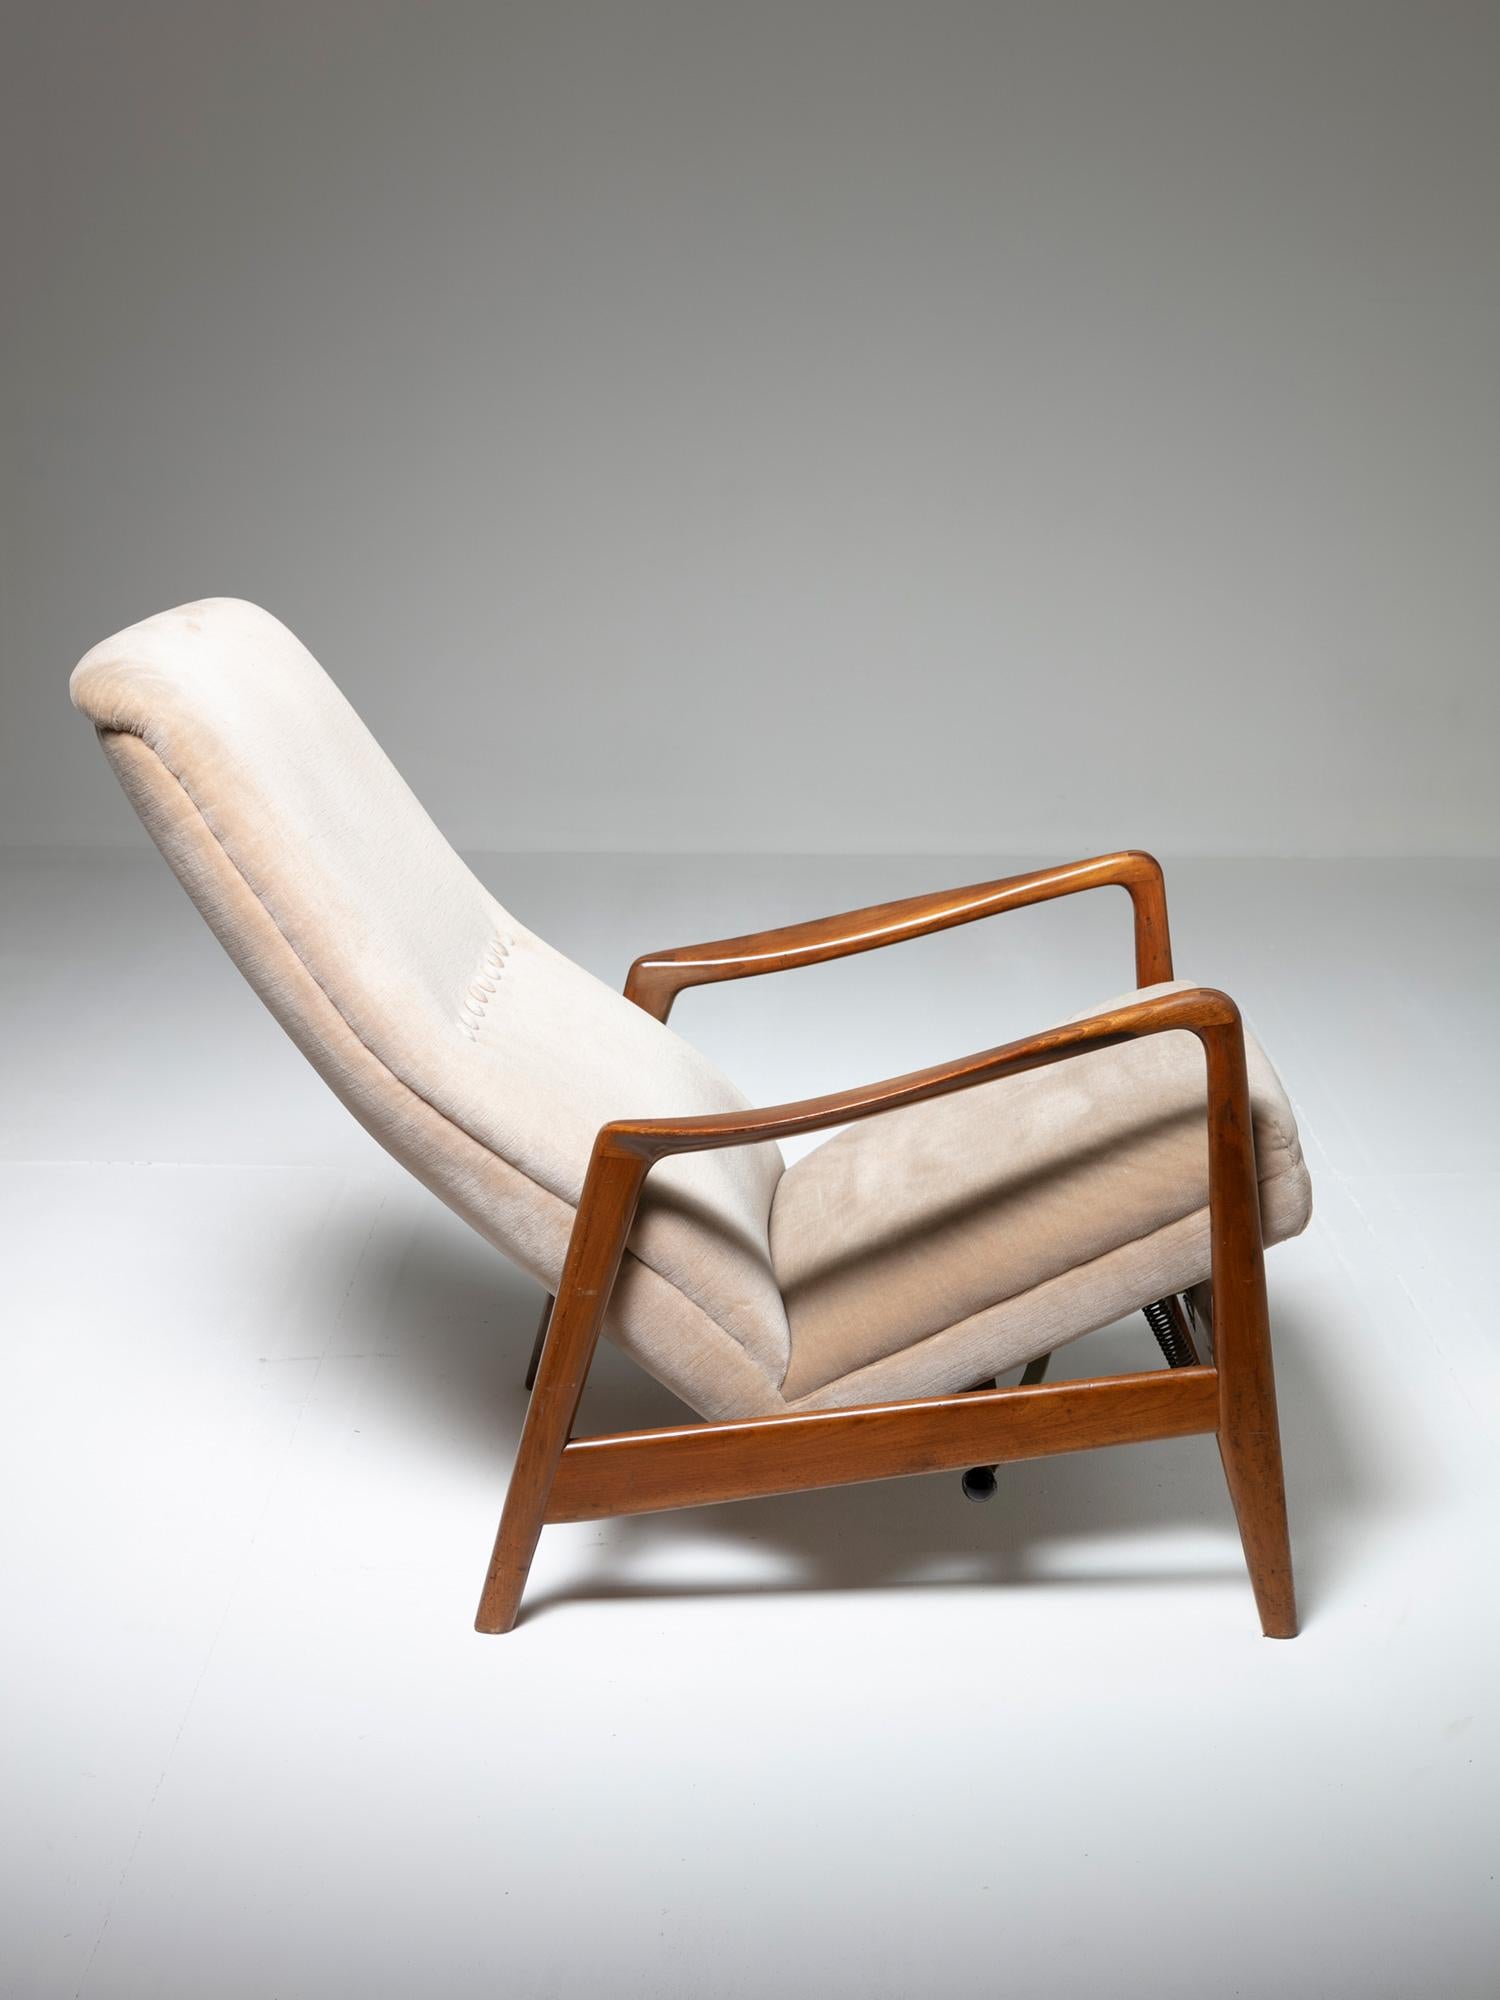 Mid-20th Century Lounge Chair by Arnestad Bruk for Cassina